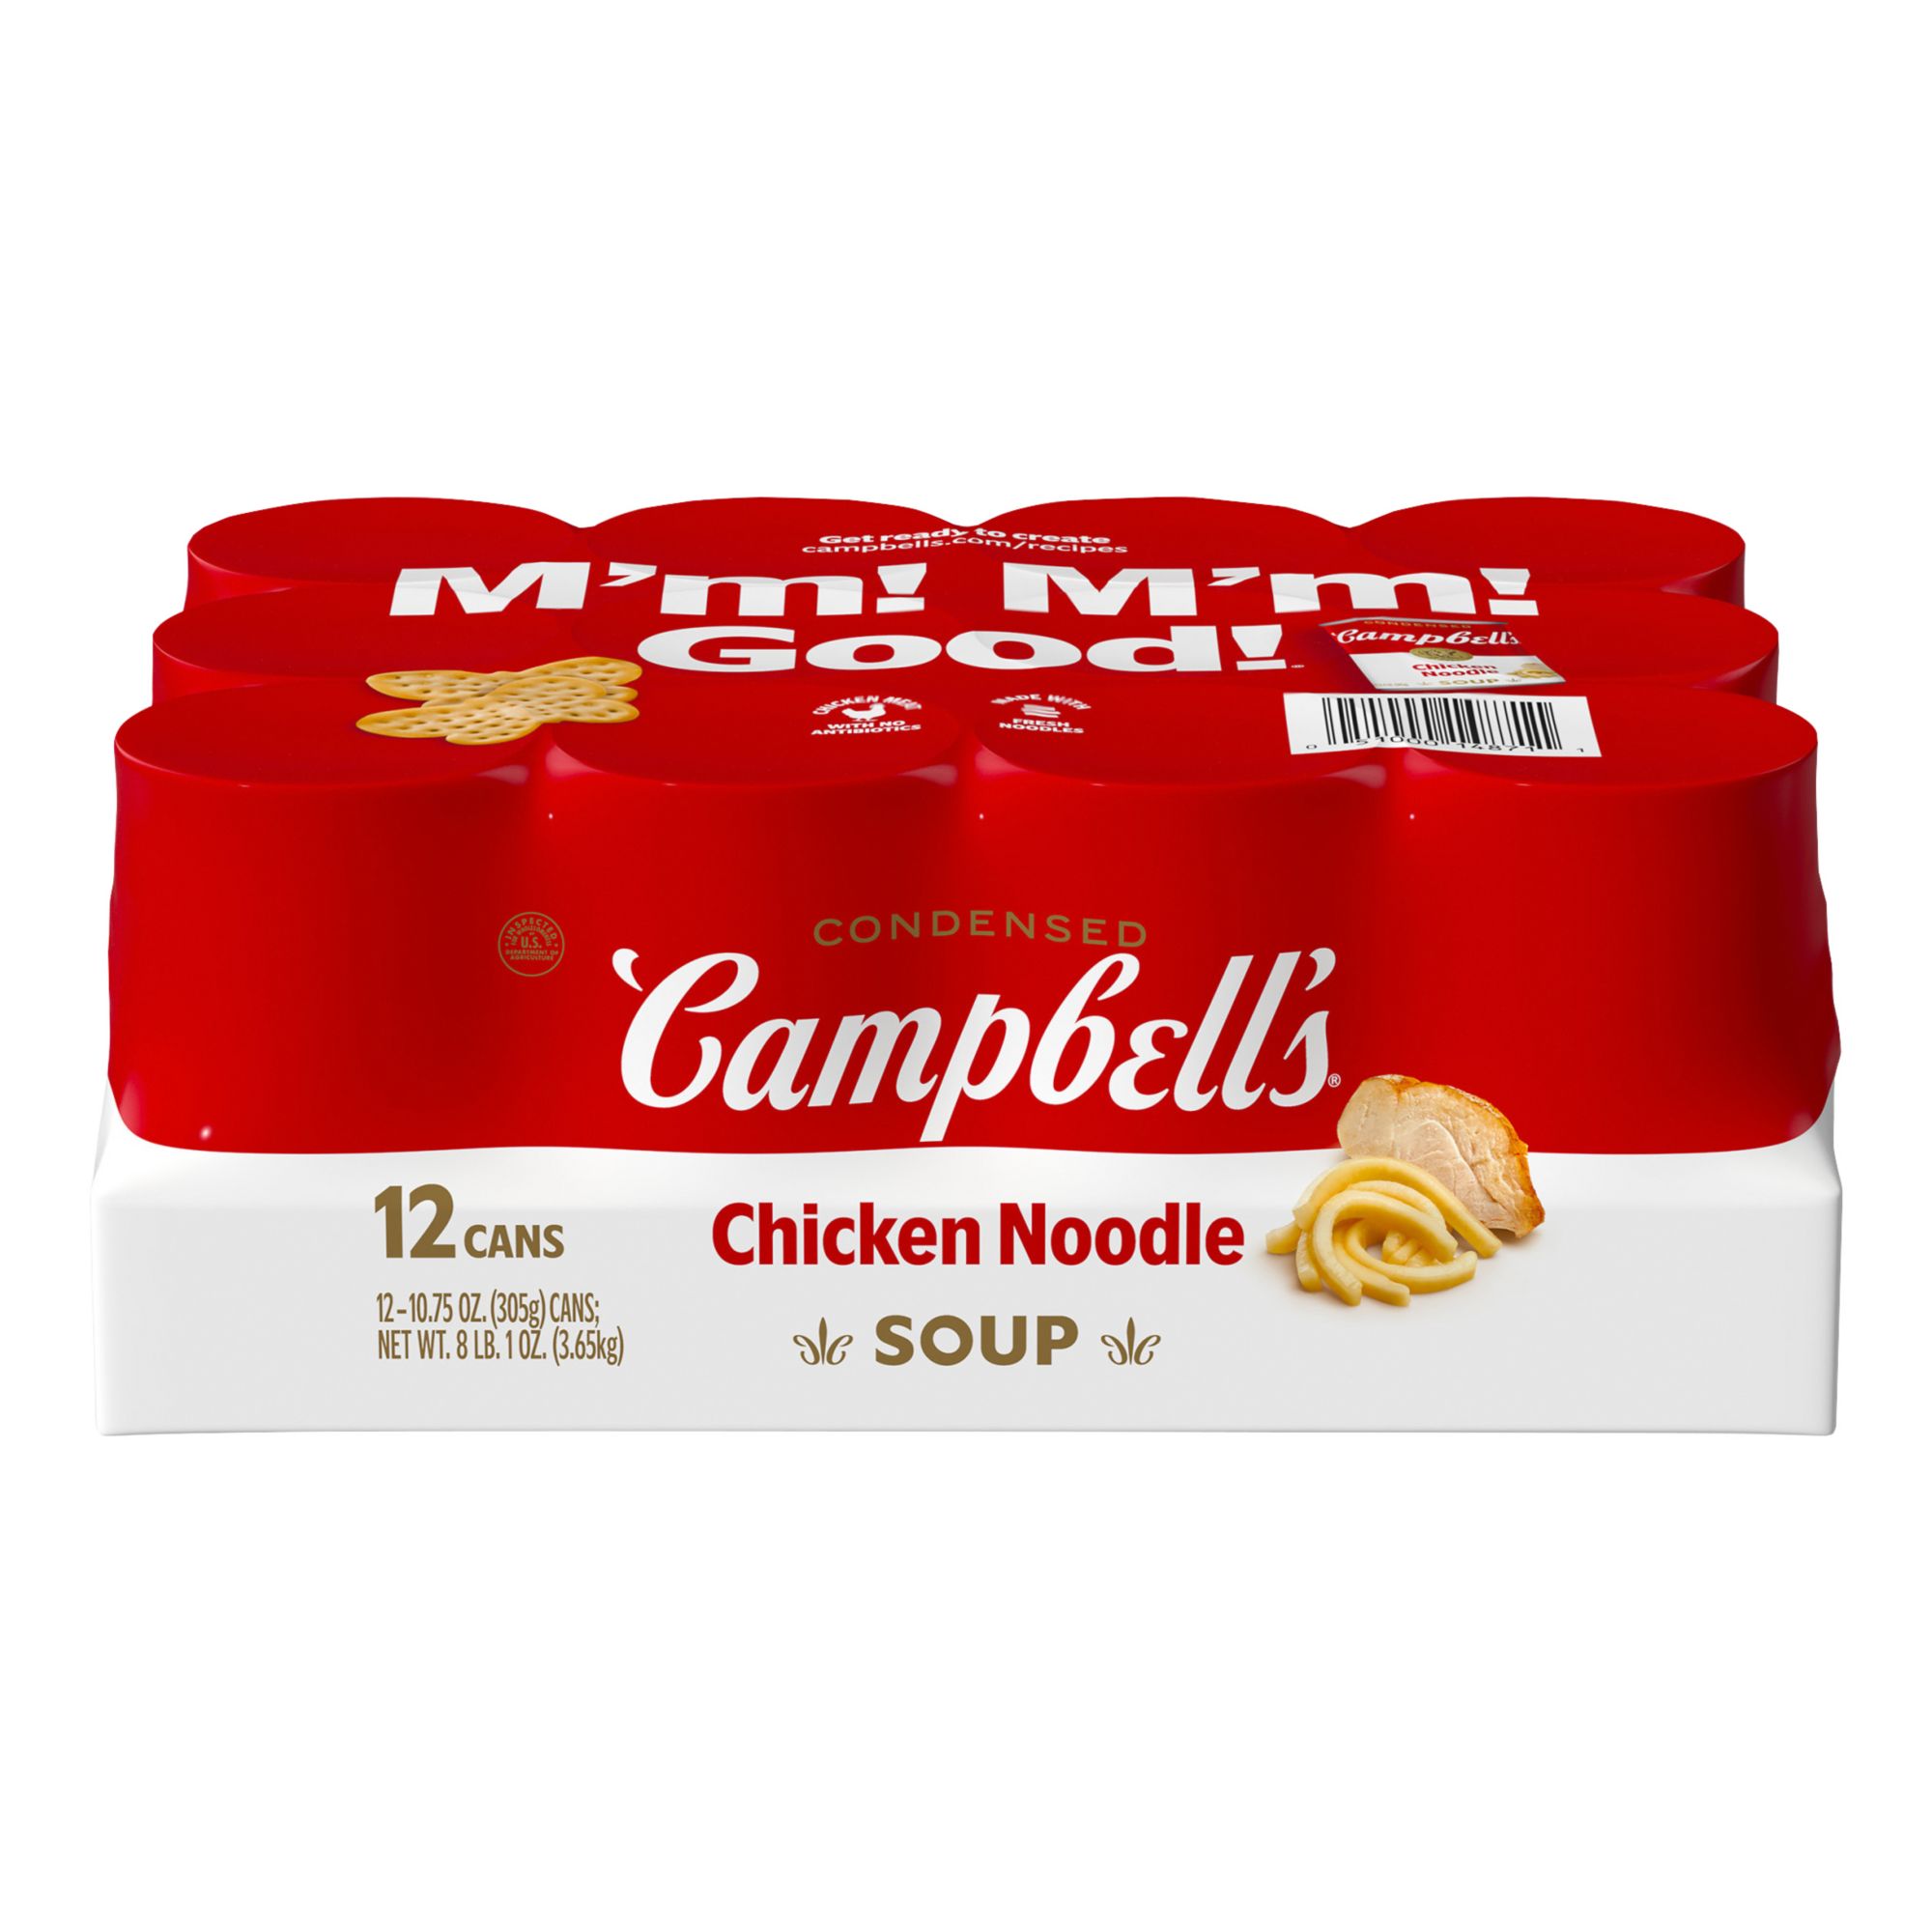 Campbell's Condensed Cream of Shrimp Soup, 10.5 Ounce Can